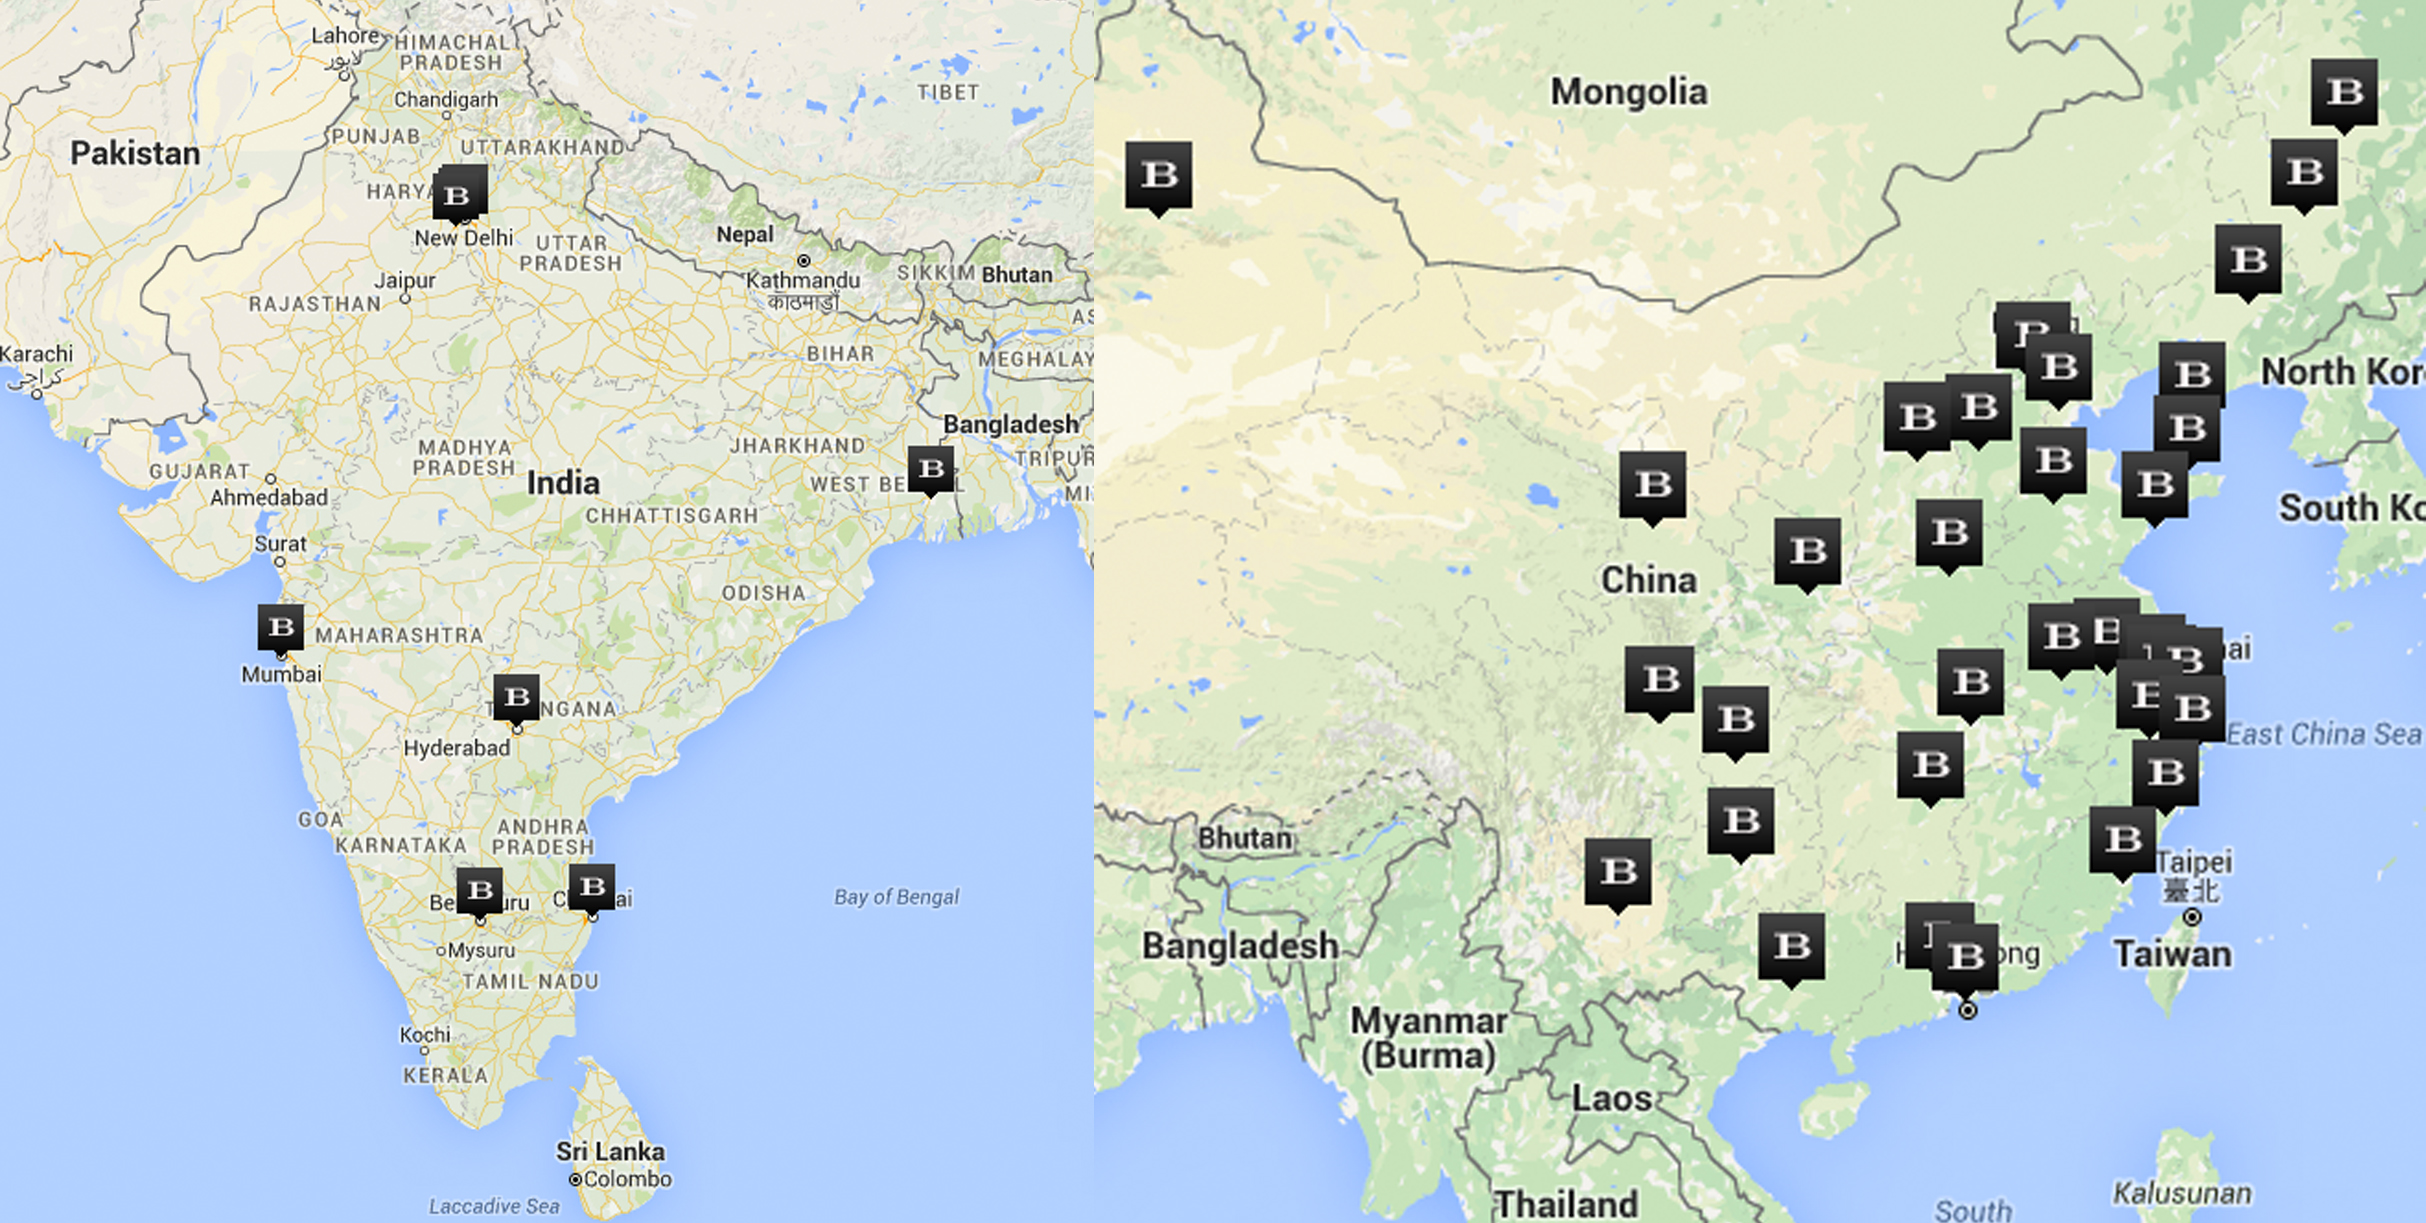 Left: Burberry stores in India, Right: Burberry stores in China. Taken from Burberry.com